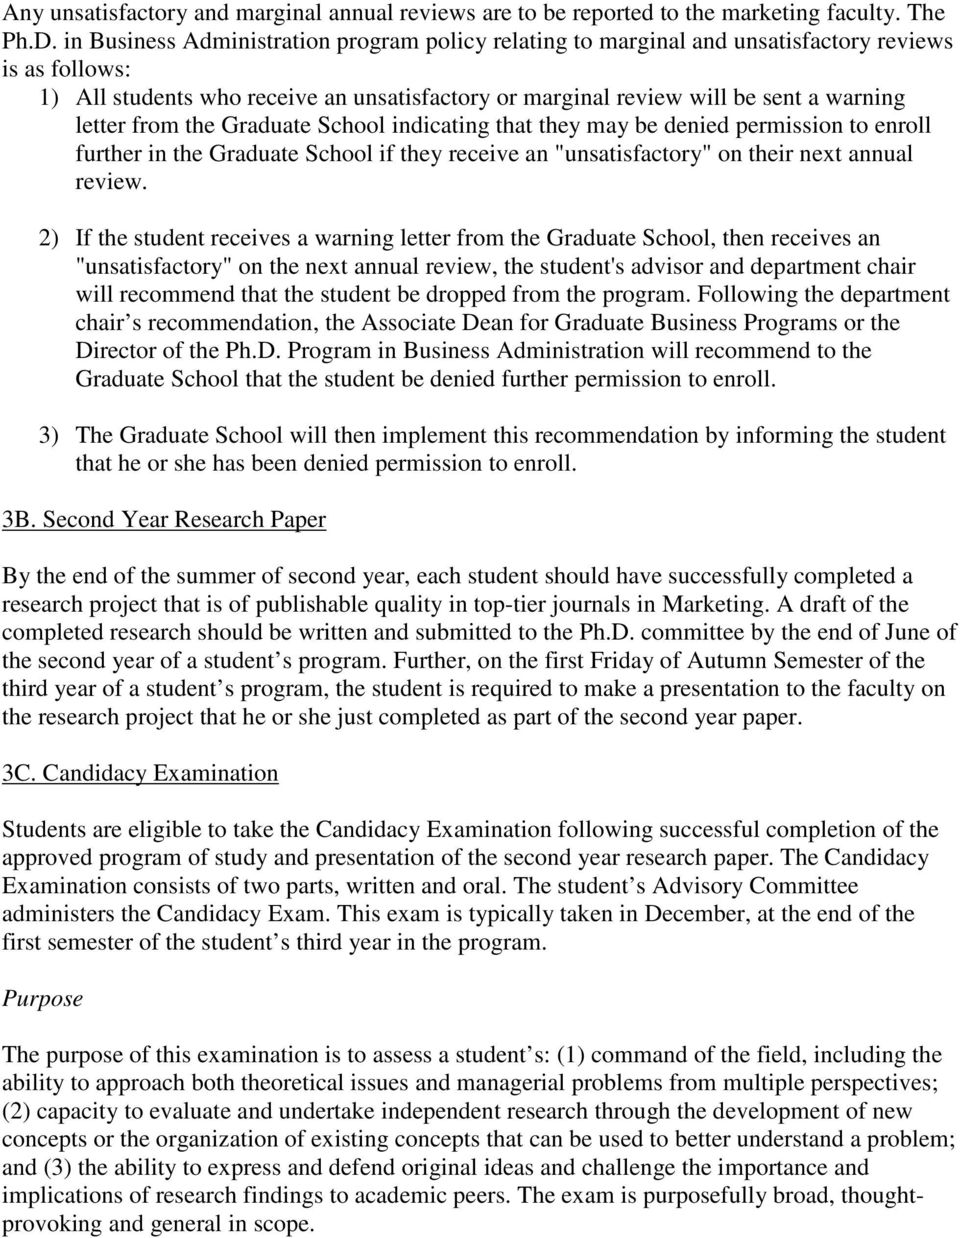 from the Graduate School indicating that they may be denied permission to enroll further in the Graduate School if they receive an "unsatisfactory" on their next annual review.